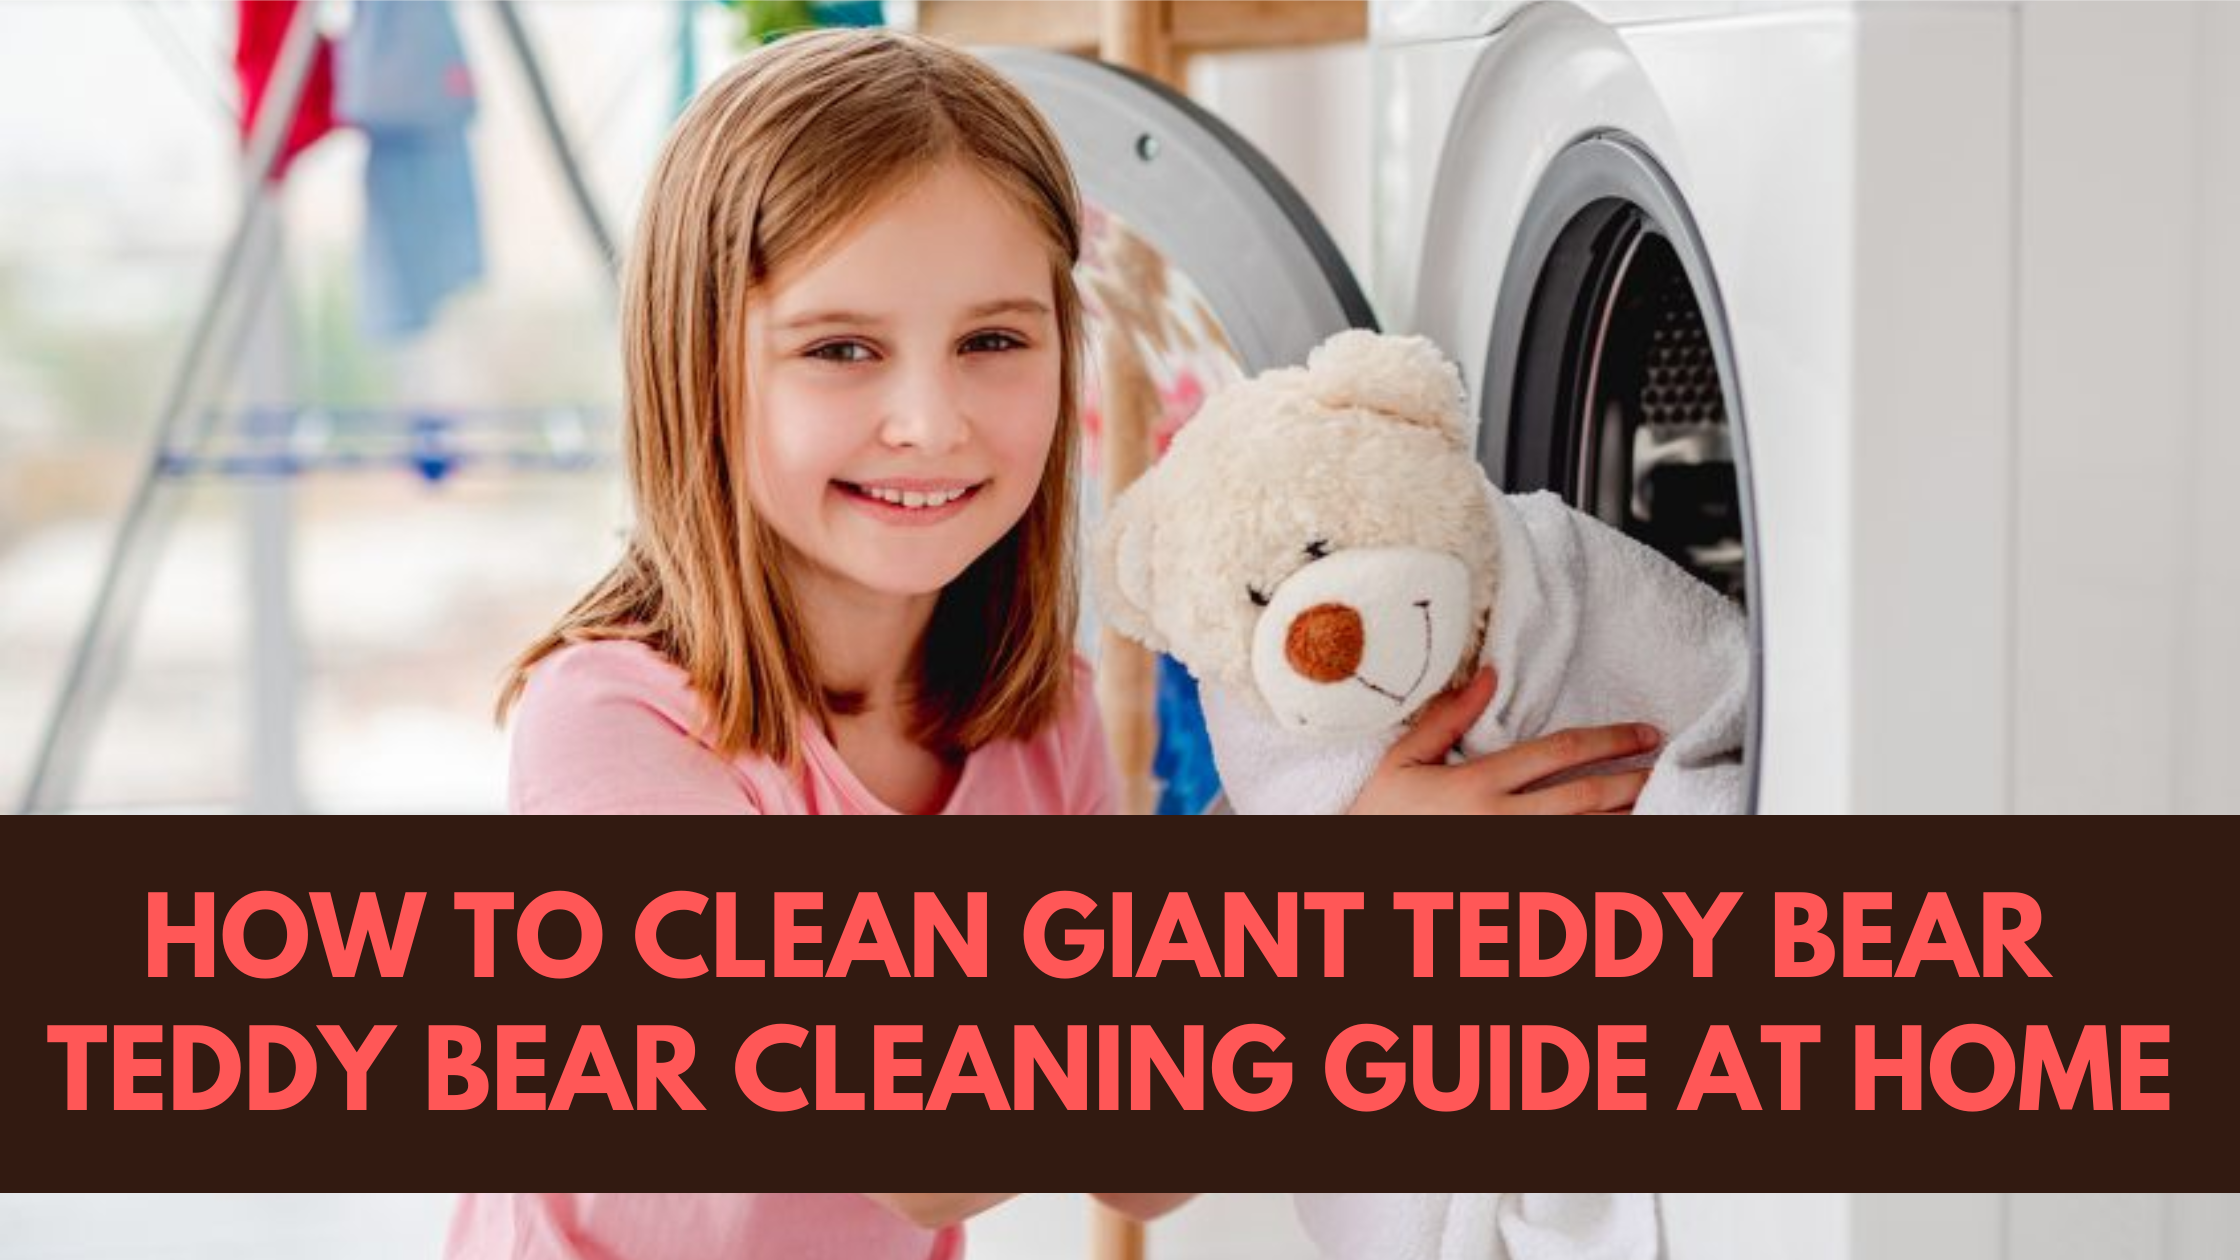 How to Clean Giant Teddy Bear - Teddy Bear Cleaning Guide At Home